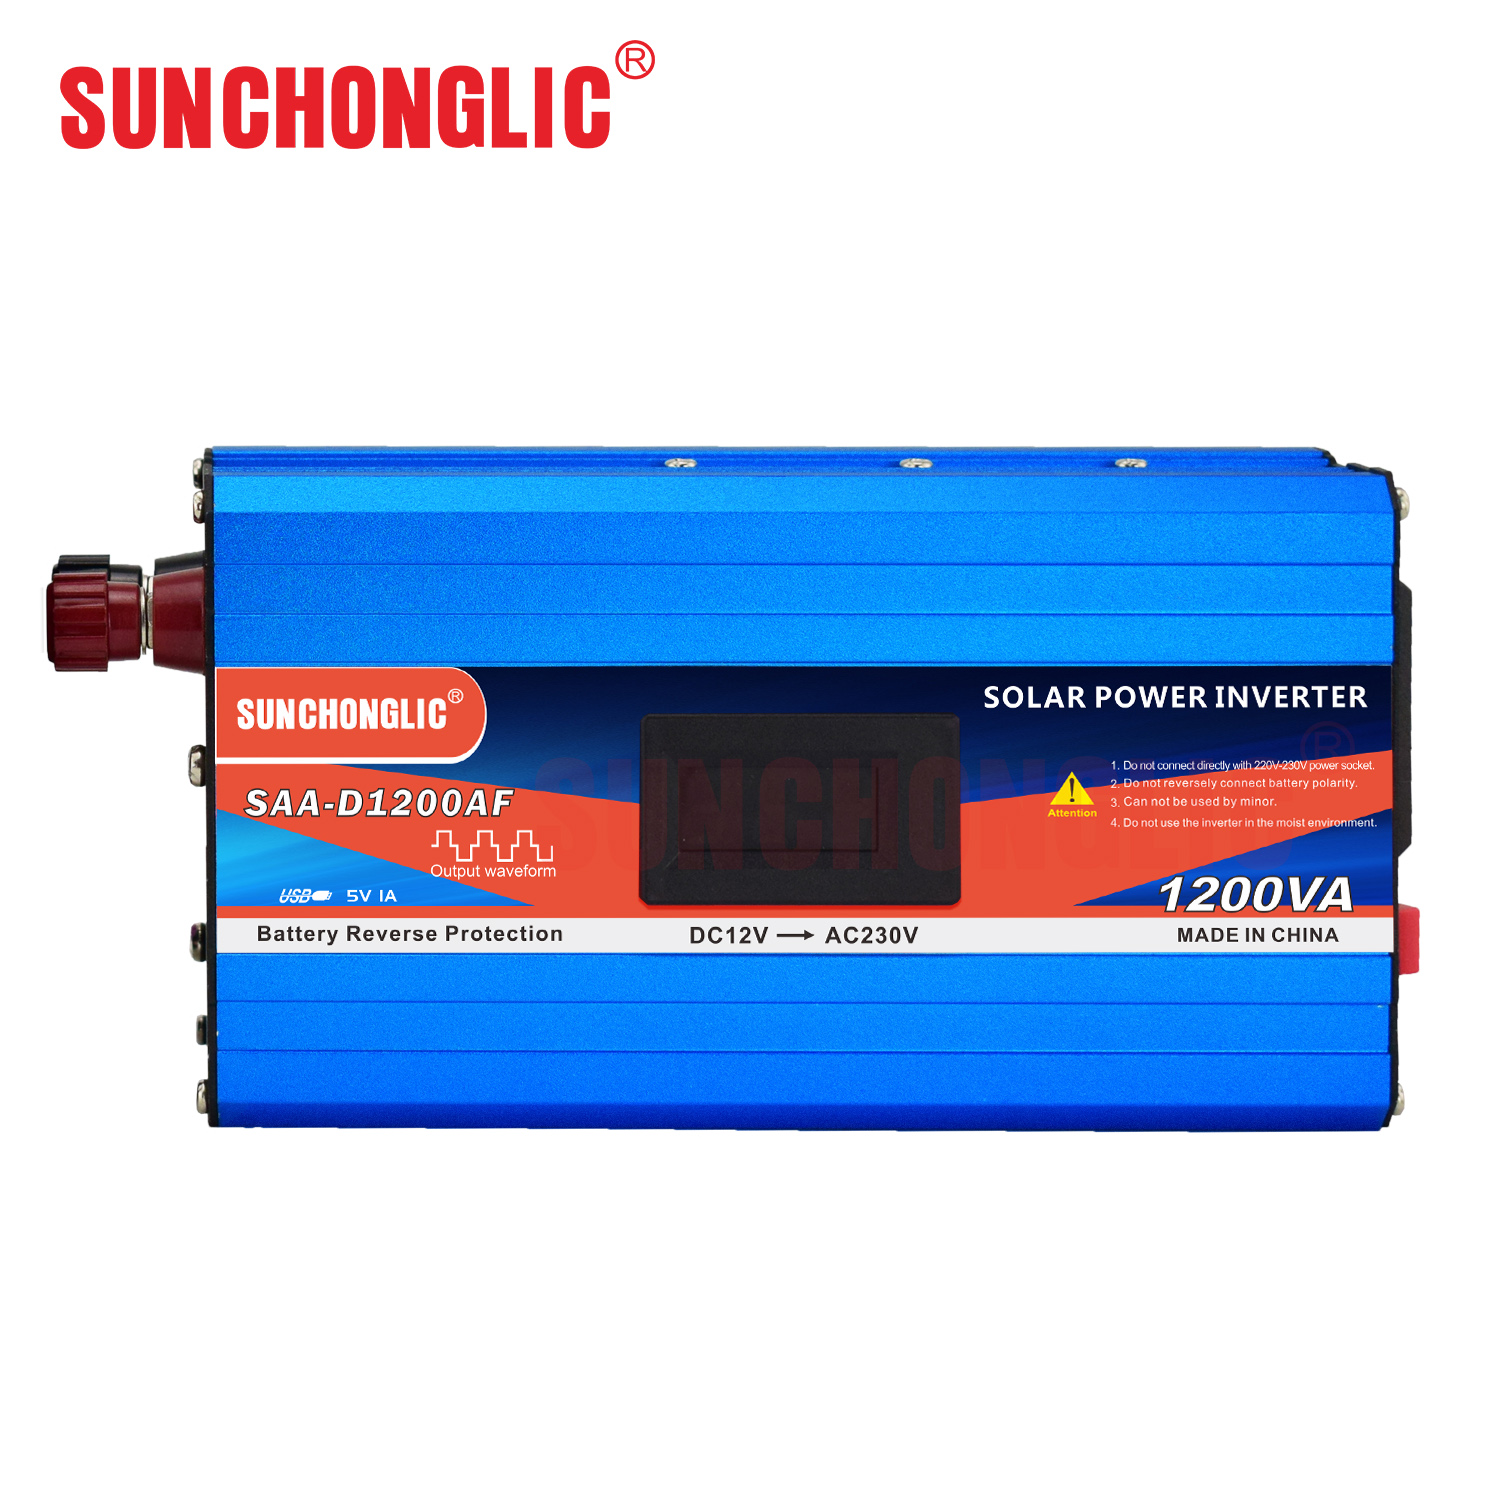 Appliance - Co., Modified SAA-D1200AF Sunchonglic - Electric Foshan Wave Sine Inverter